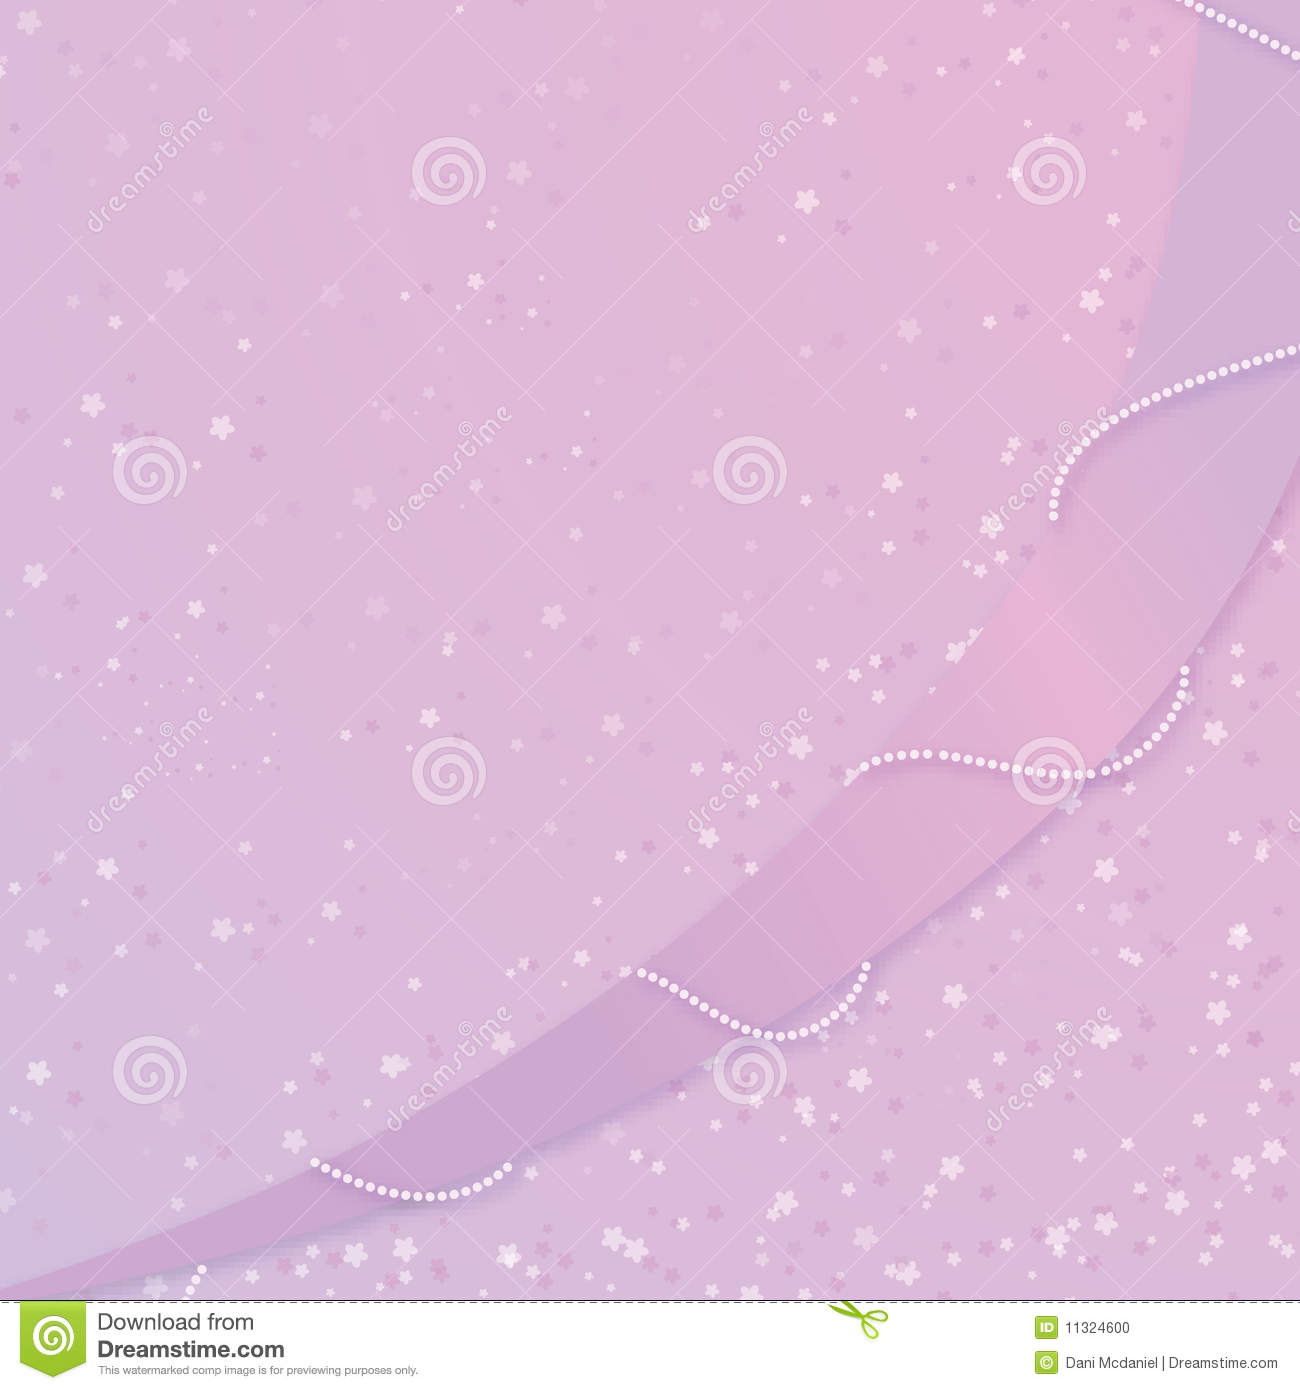 Best Girly Graphic Background